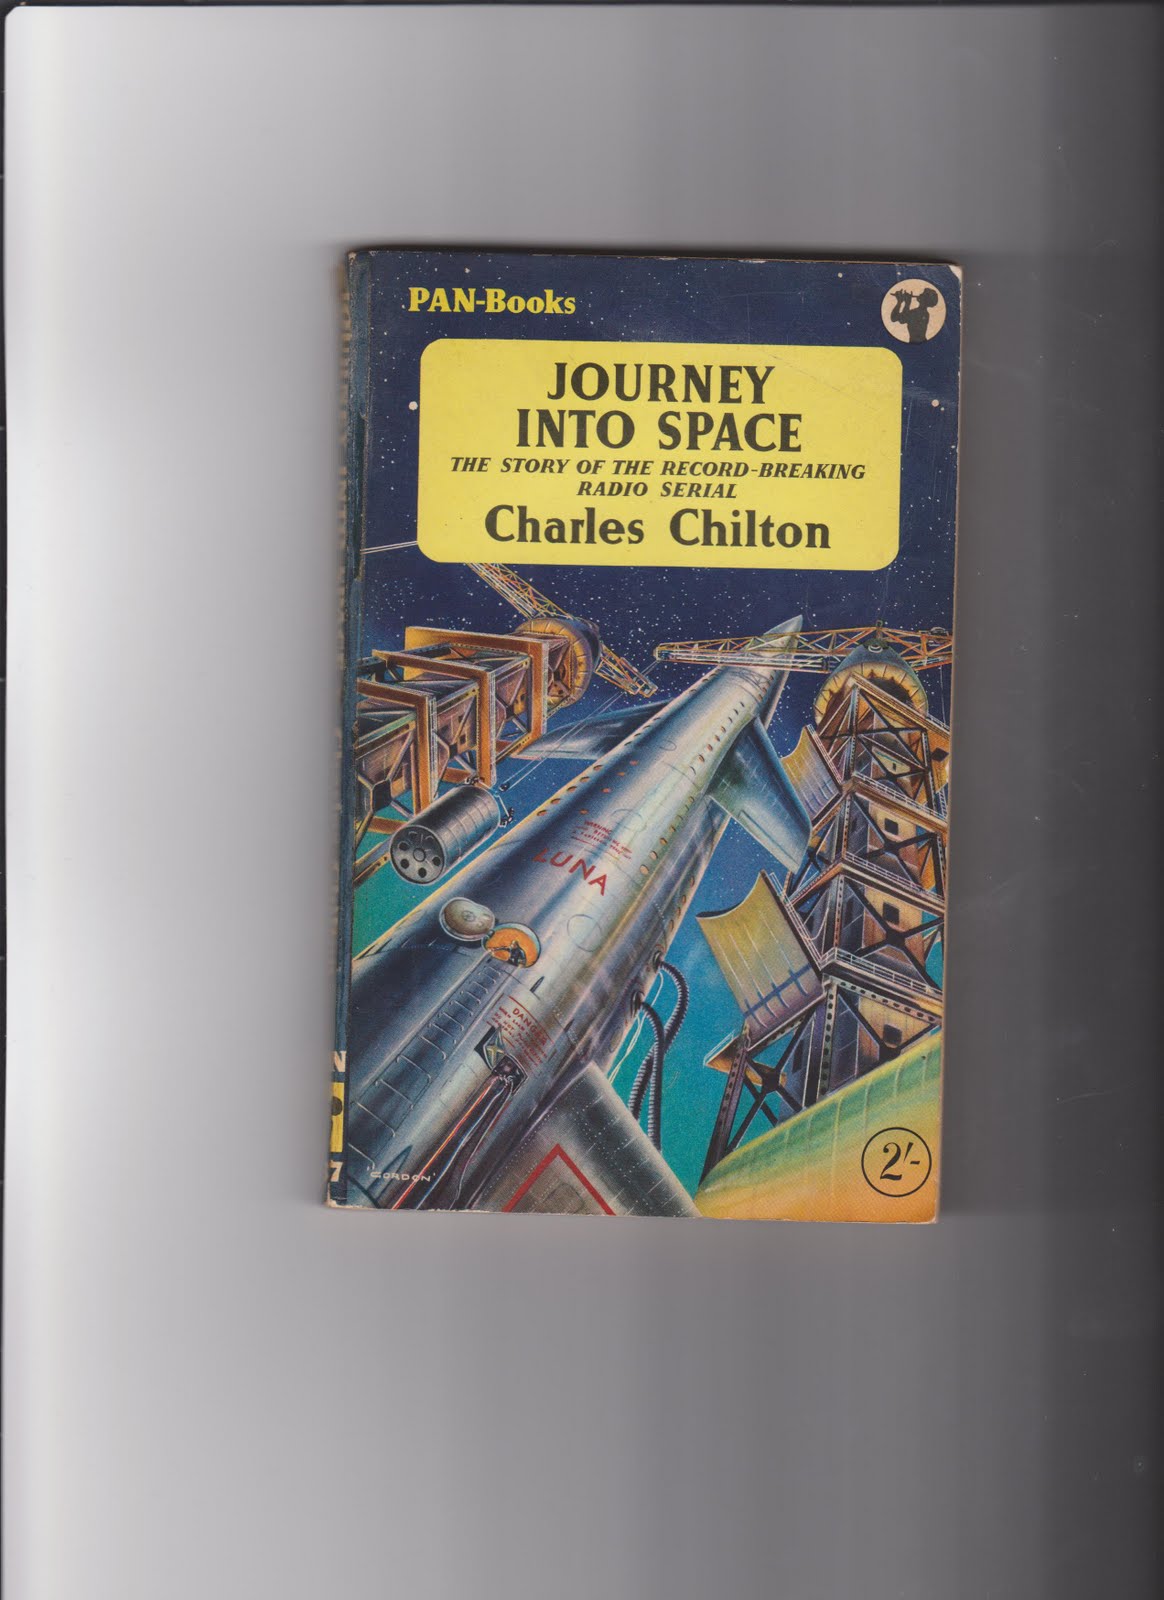 Journey into Space: The World in Peril, Episode 18 Charles Chilton